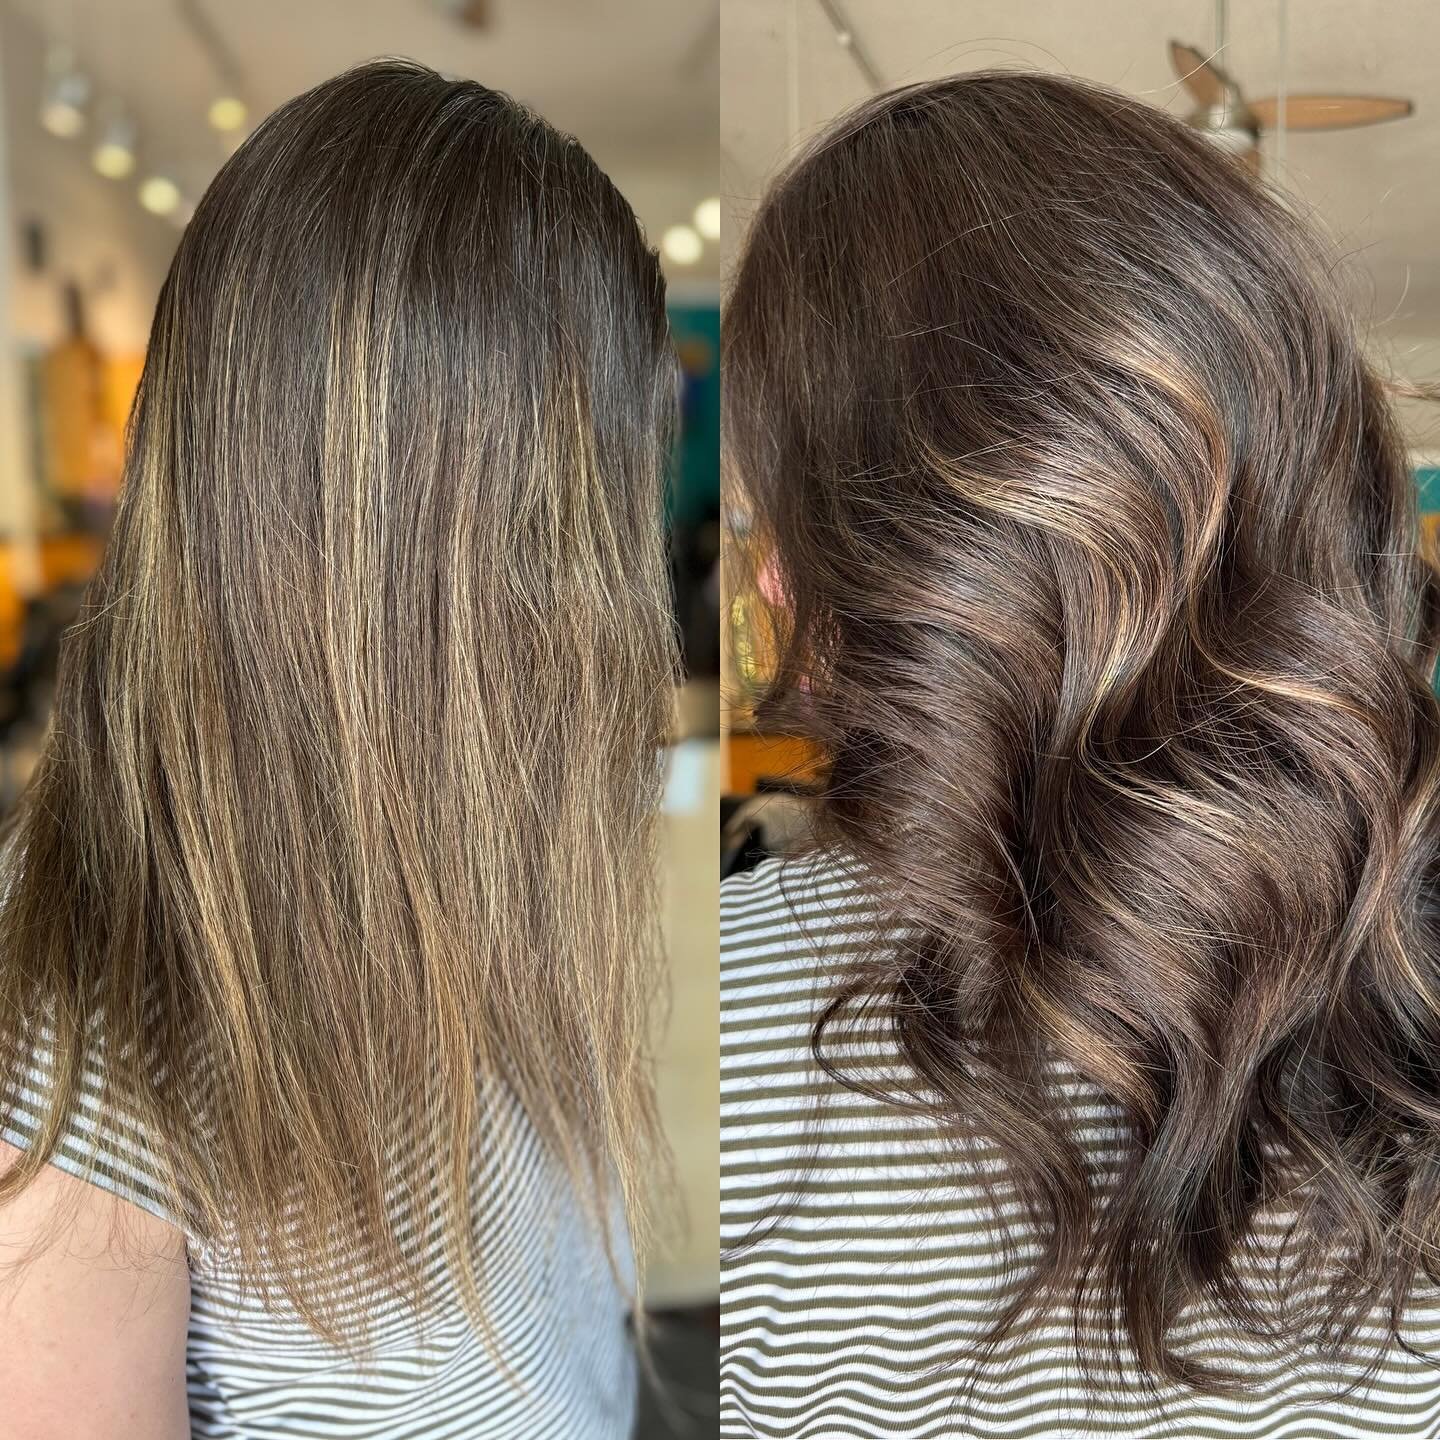 Loving the move towards chocolate rich color with natural highlights! Shiny hair goodness. #lindenhills #chocolatehair #brunette #minneapolishairstylist #minneapolis #naturalhaircolor @sagewellnessandnutrition